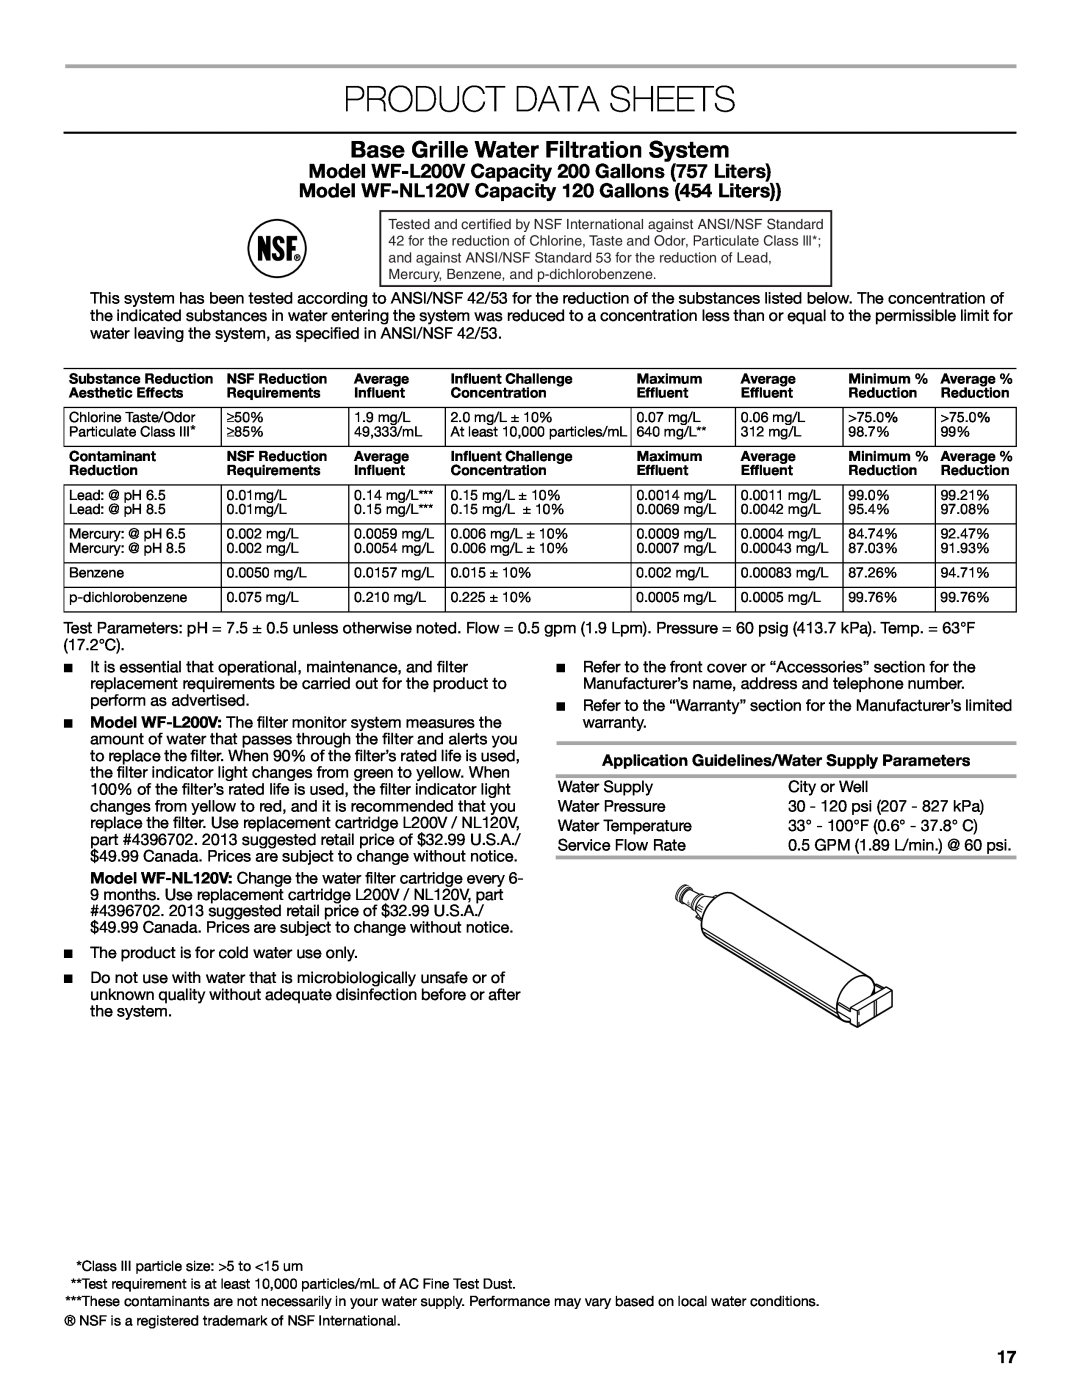 Jenn-Air W10549548A manual Product Data Sheets, Base Grille Water Filtration System 